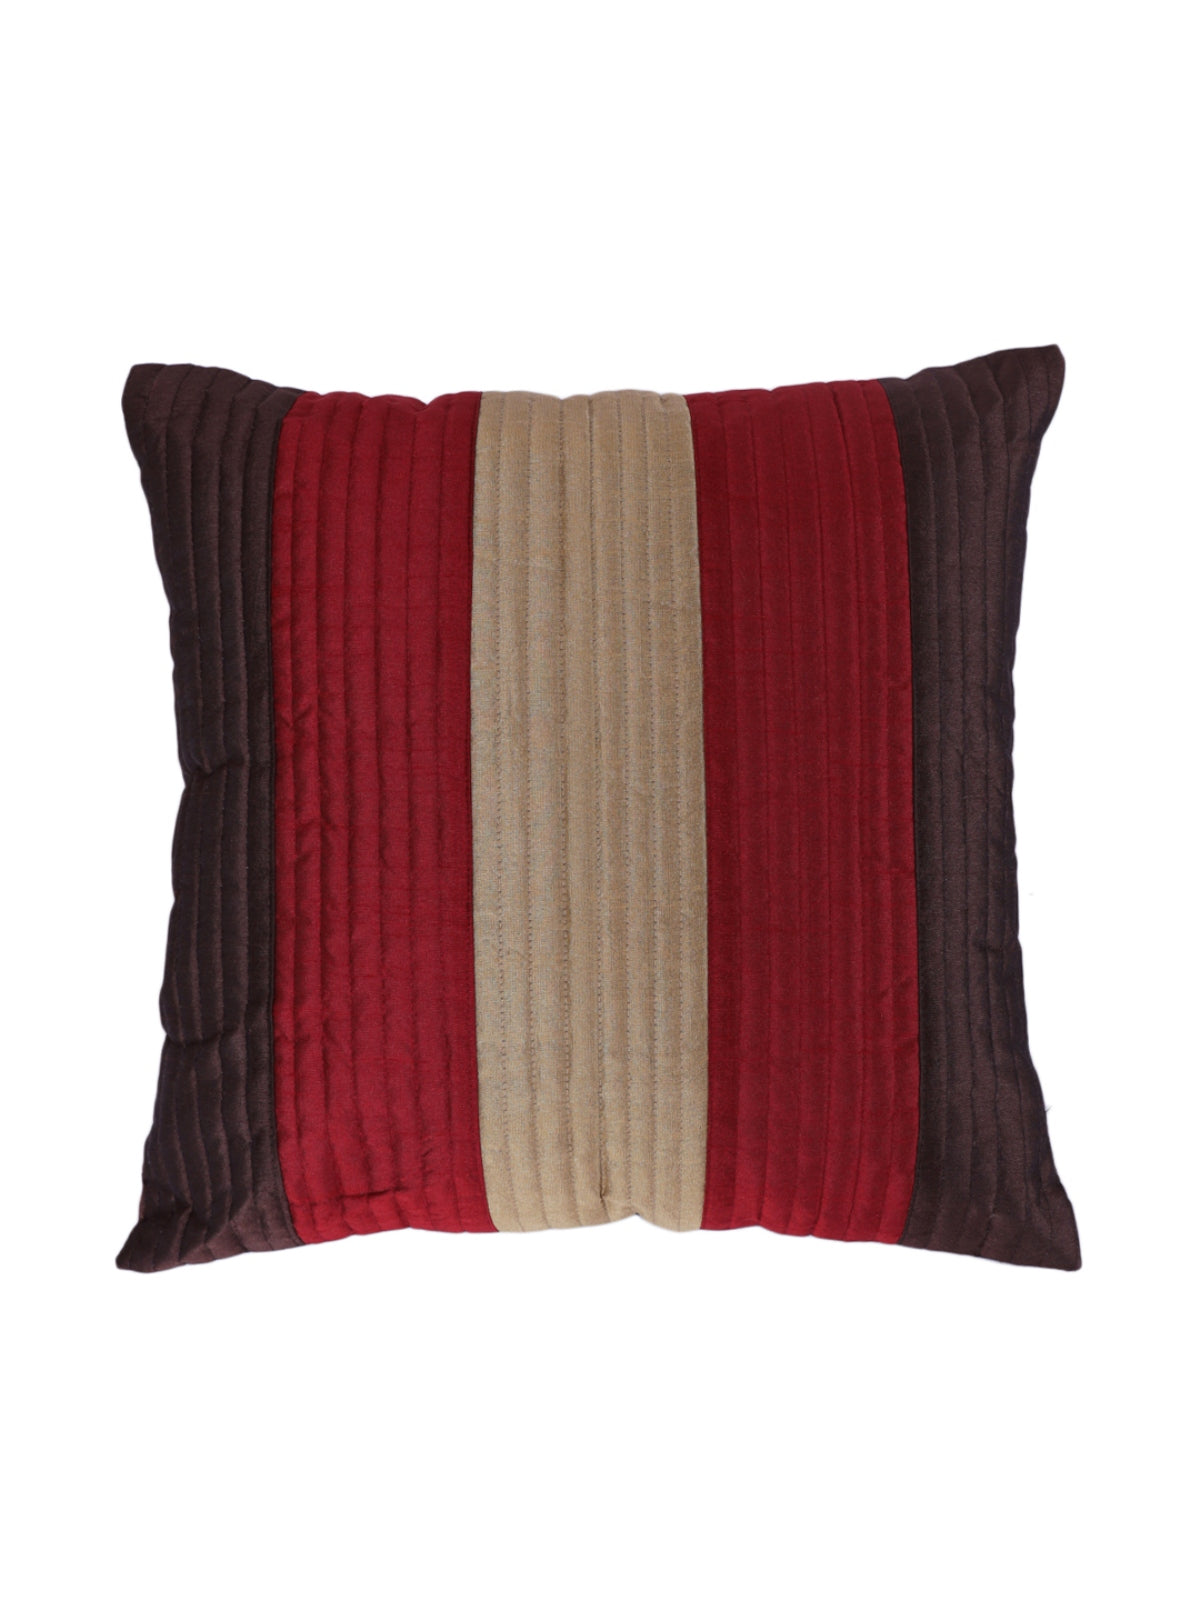 Striped Printed Polyester Cushion Cover Set of 5 - Brown & Maroon